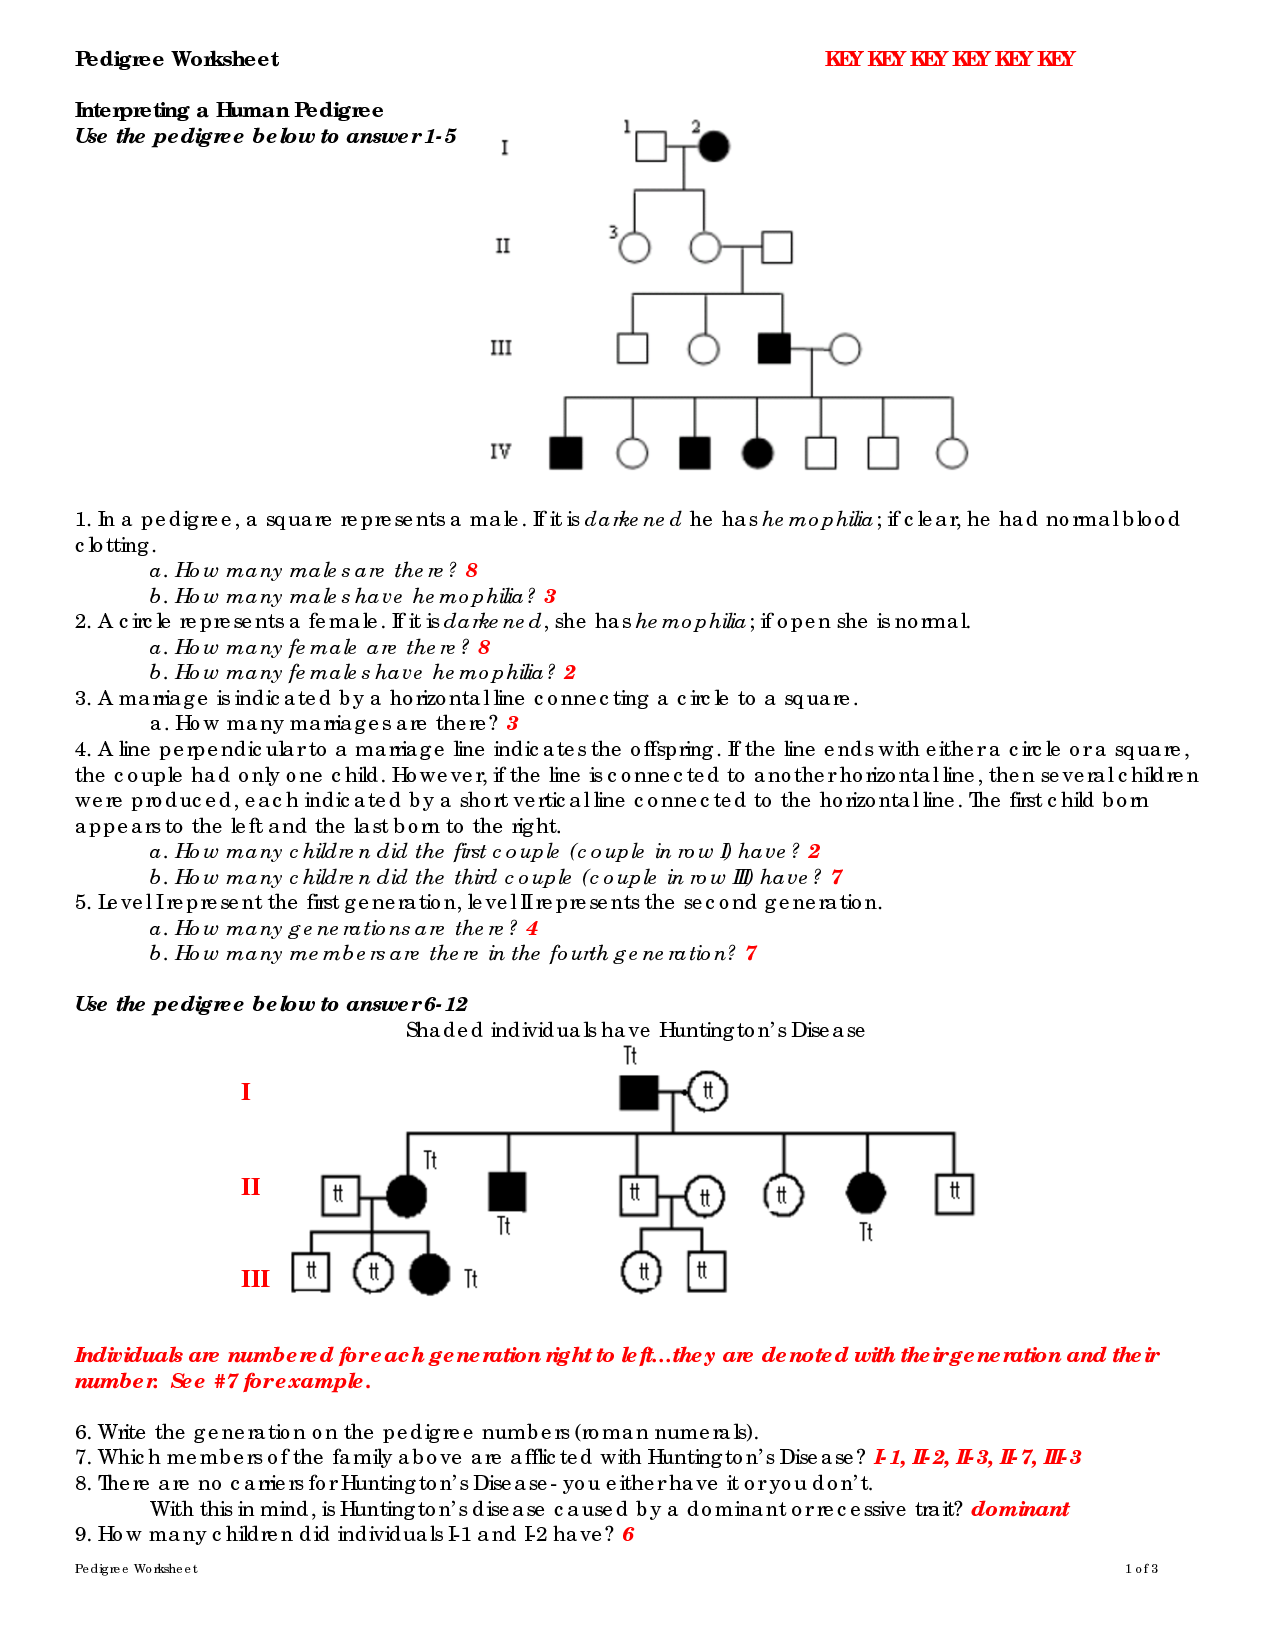 genetics essay questions and answers pdf